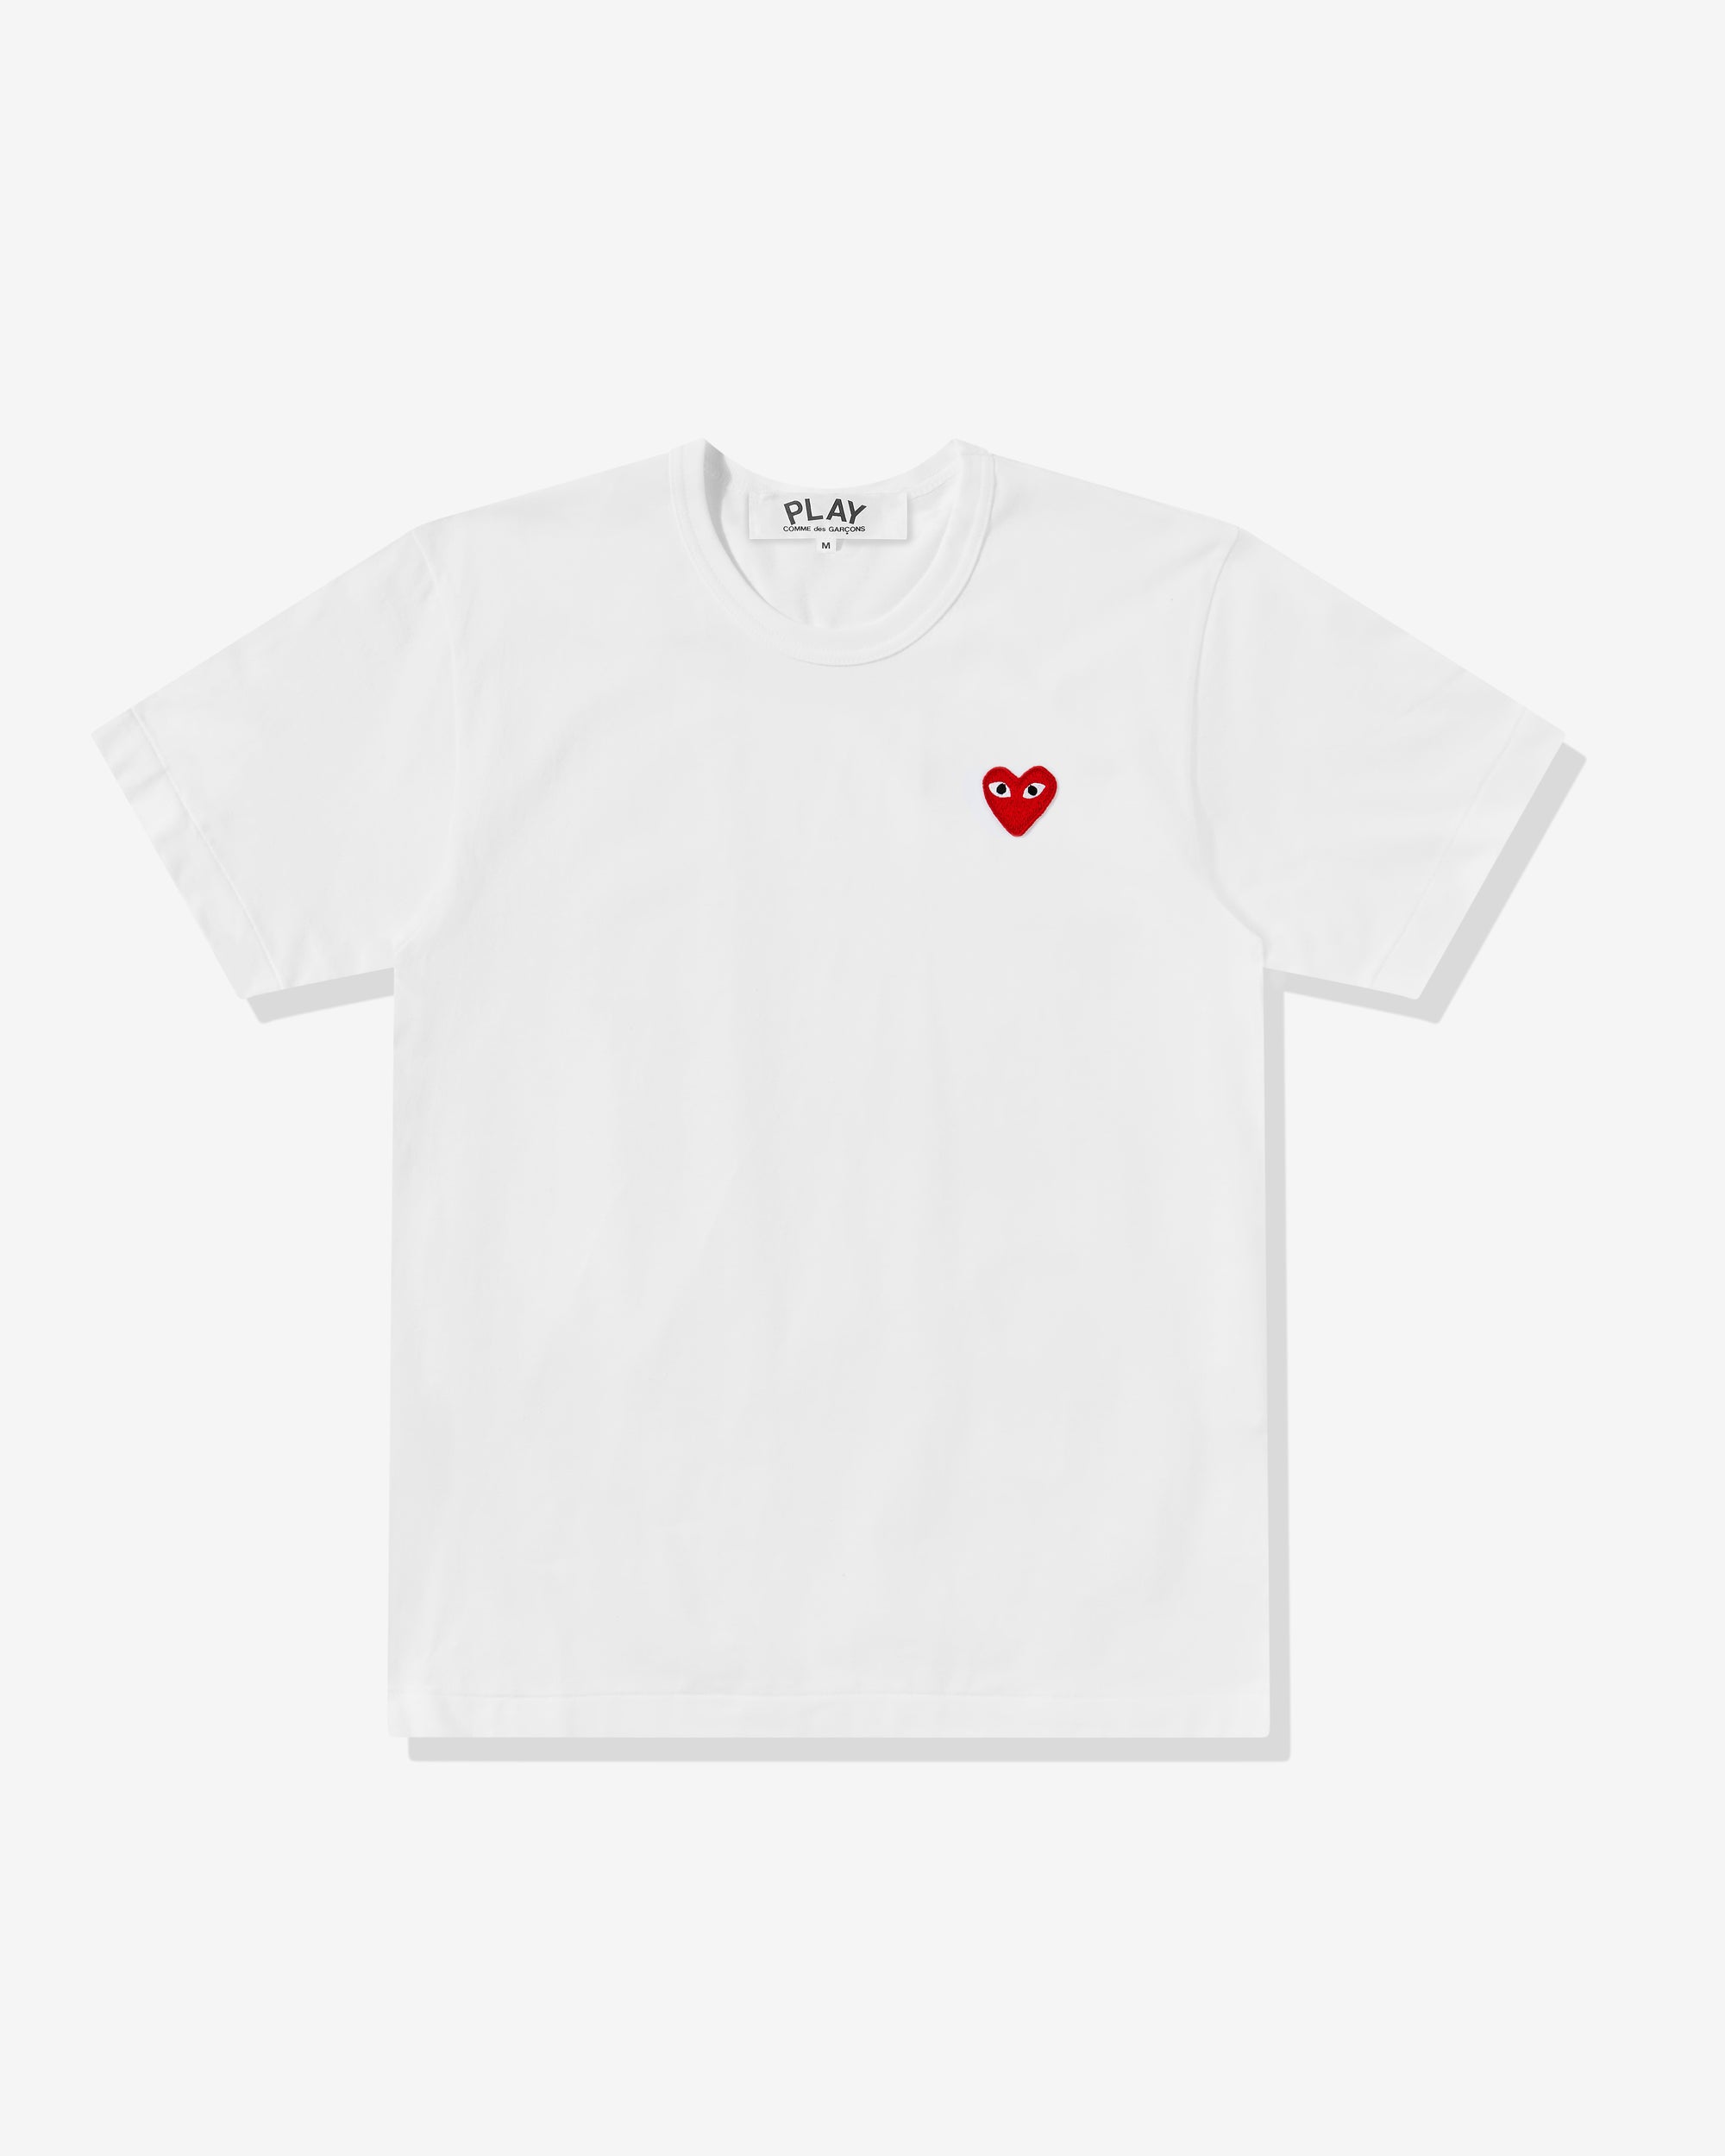 Play - Red T-Shirt - (White) view 1